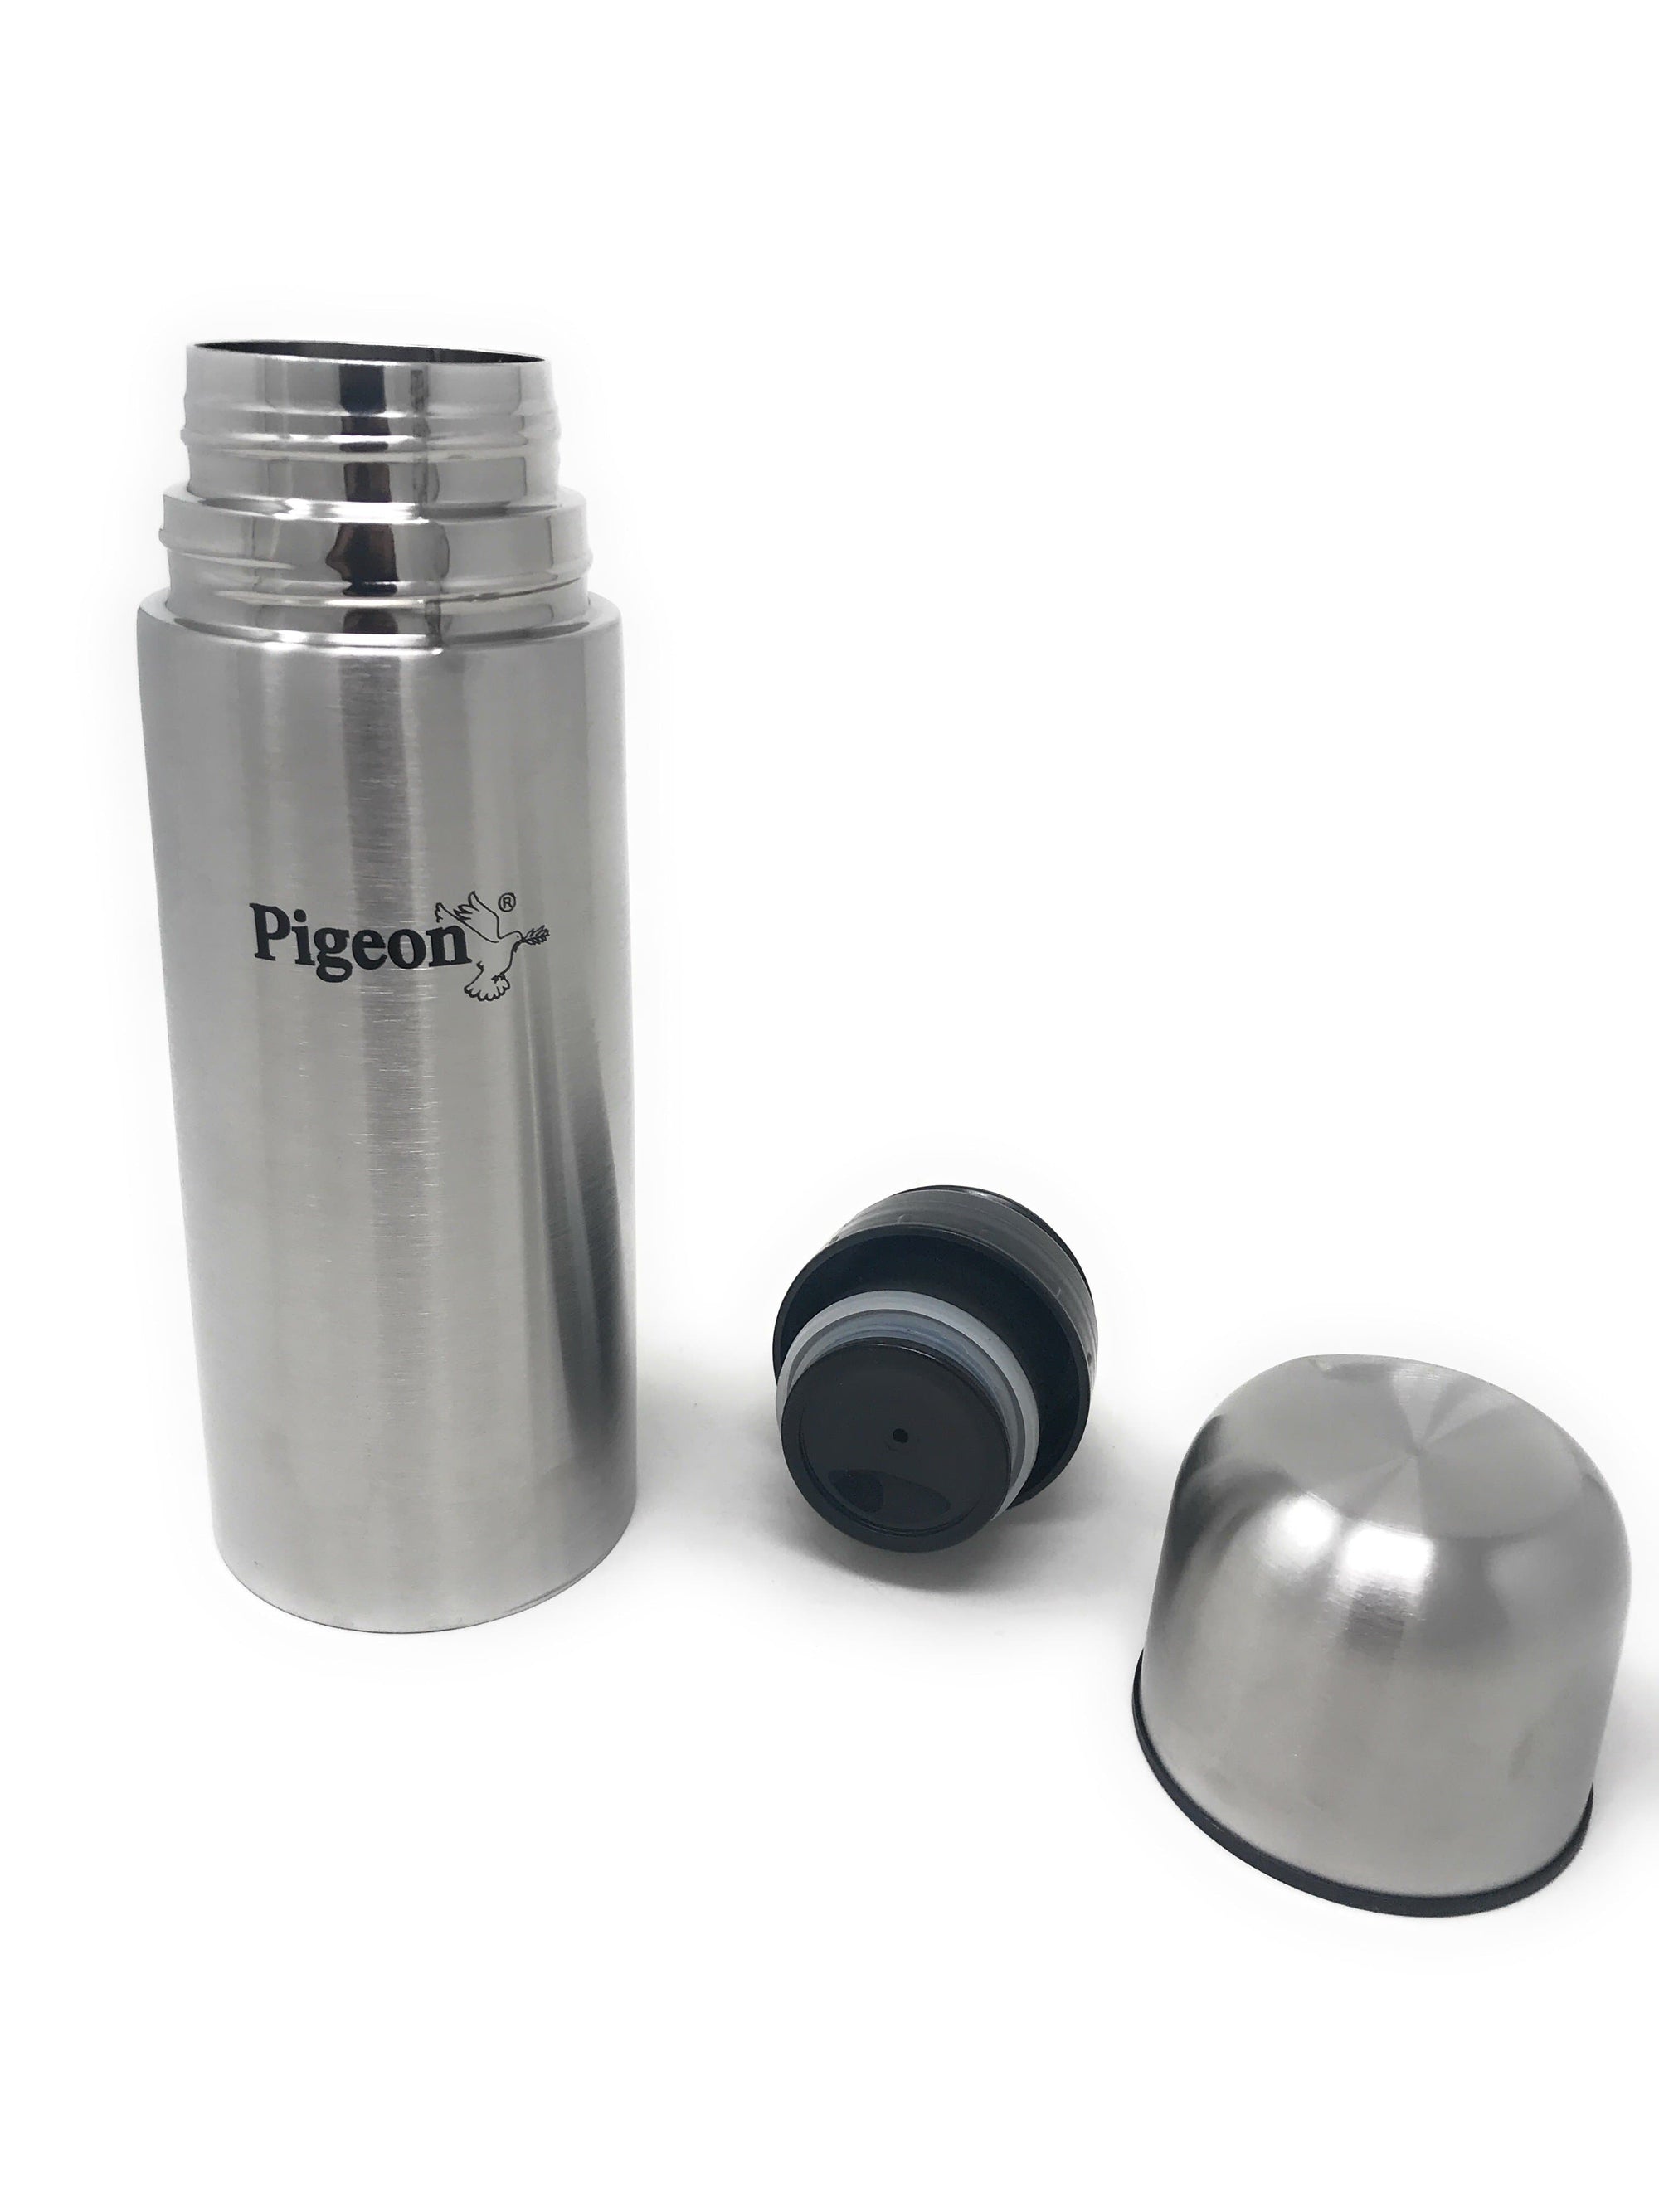 Pigeon Bullet Vaccum Insulated Stainless Steel Flask - KITCHEN MART